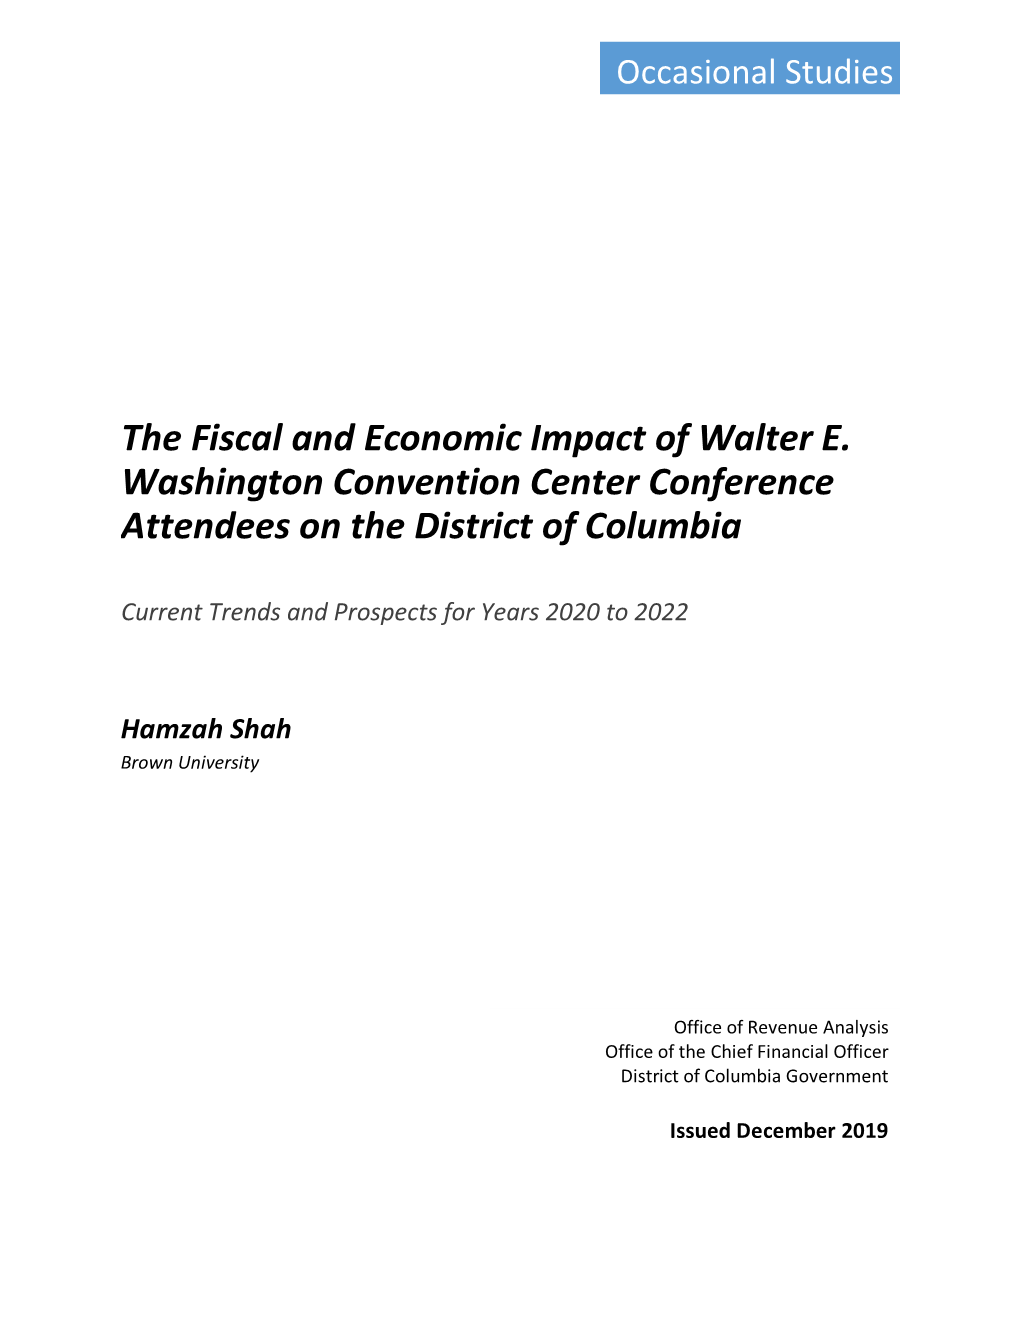 The Fiscal and Economic Impact of Walter E. Washington Convention Center Conference Attendees on the District of Columbia